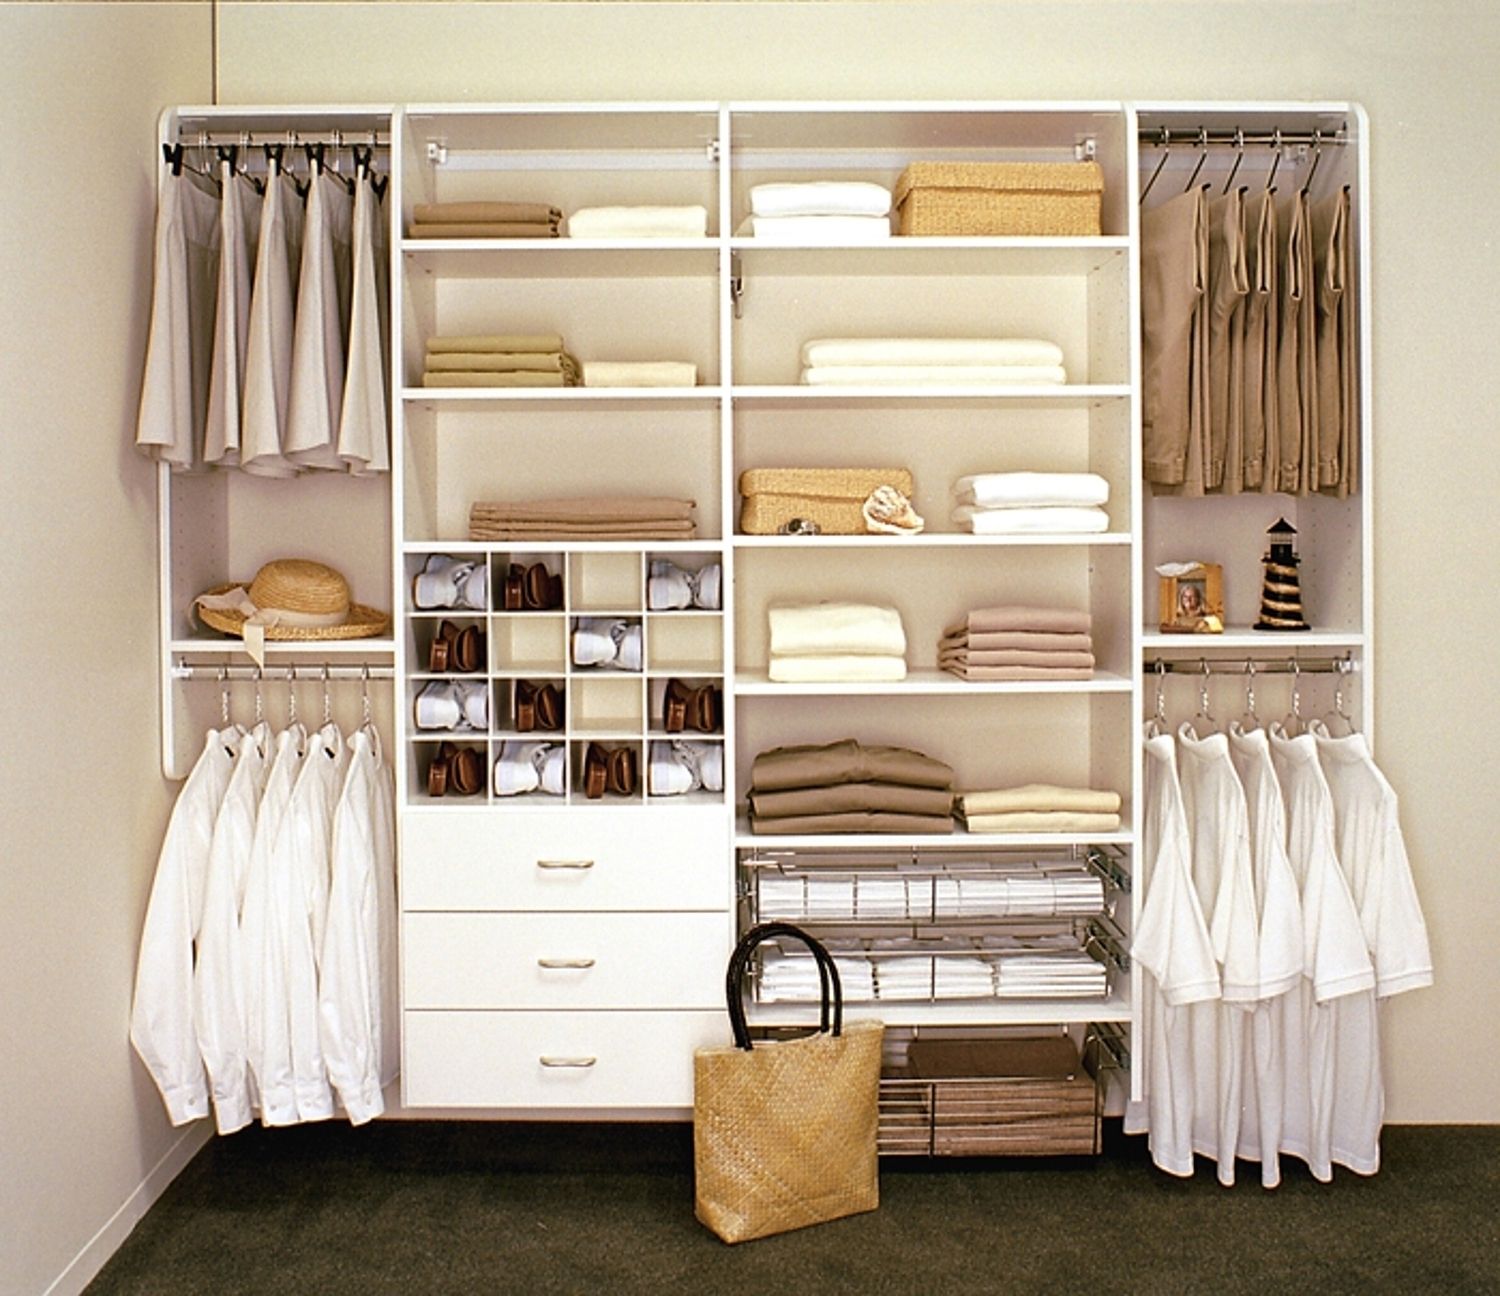 Most Recently Released Bedroom Wardrobes Storages Intended For Closet Storage : Modern Wadrobe Bedroom Storage Cabinets Wall (Photo 11 of 15)